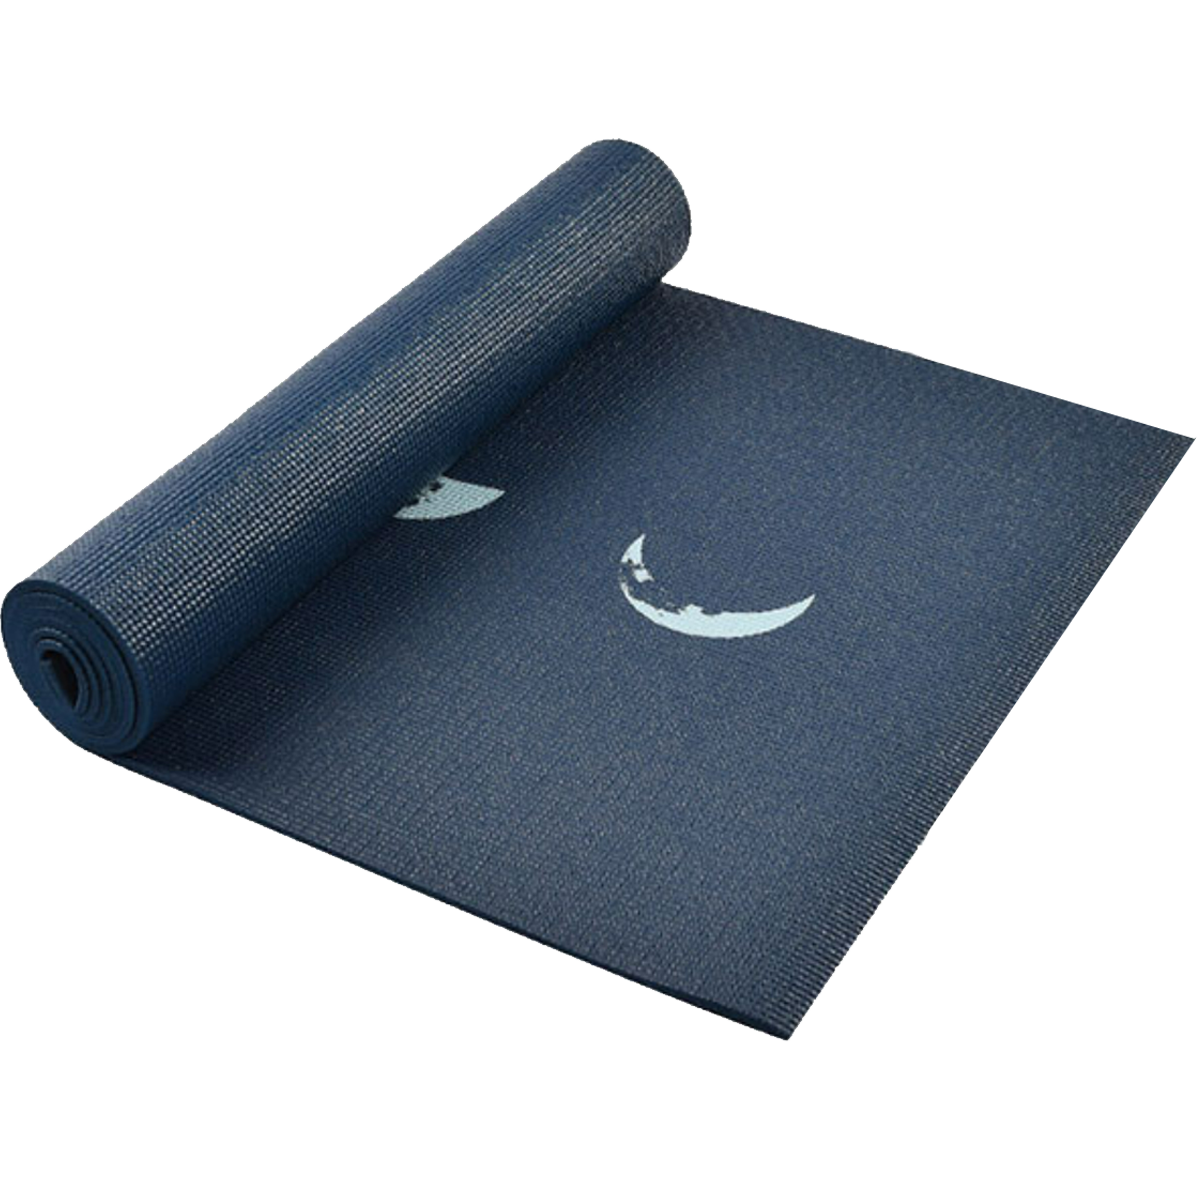 Gallery Collection Ultra Yoga Mat alternate view